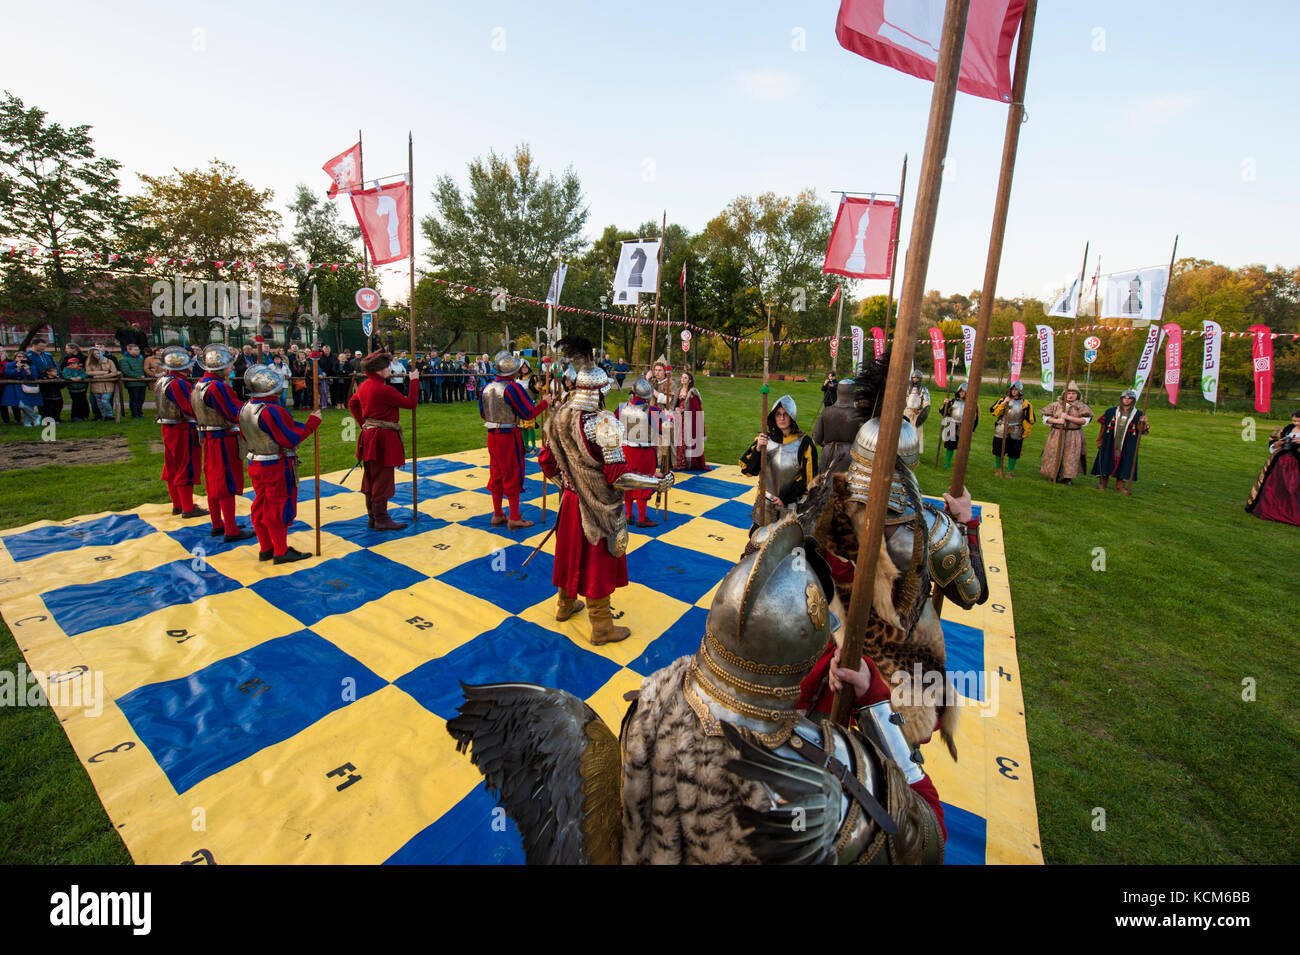 Performance devoted to the Battle of Vienna 1683 as a chess game staged by live playing pieces at the foot of Pultusk Castle in Mazovia, Poland. Stock Photo